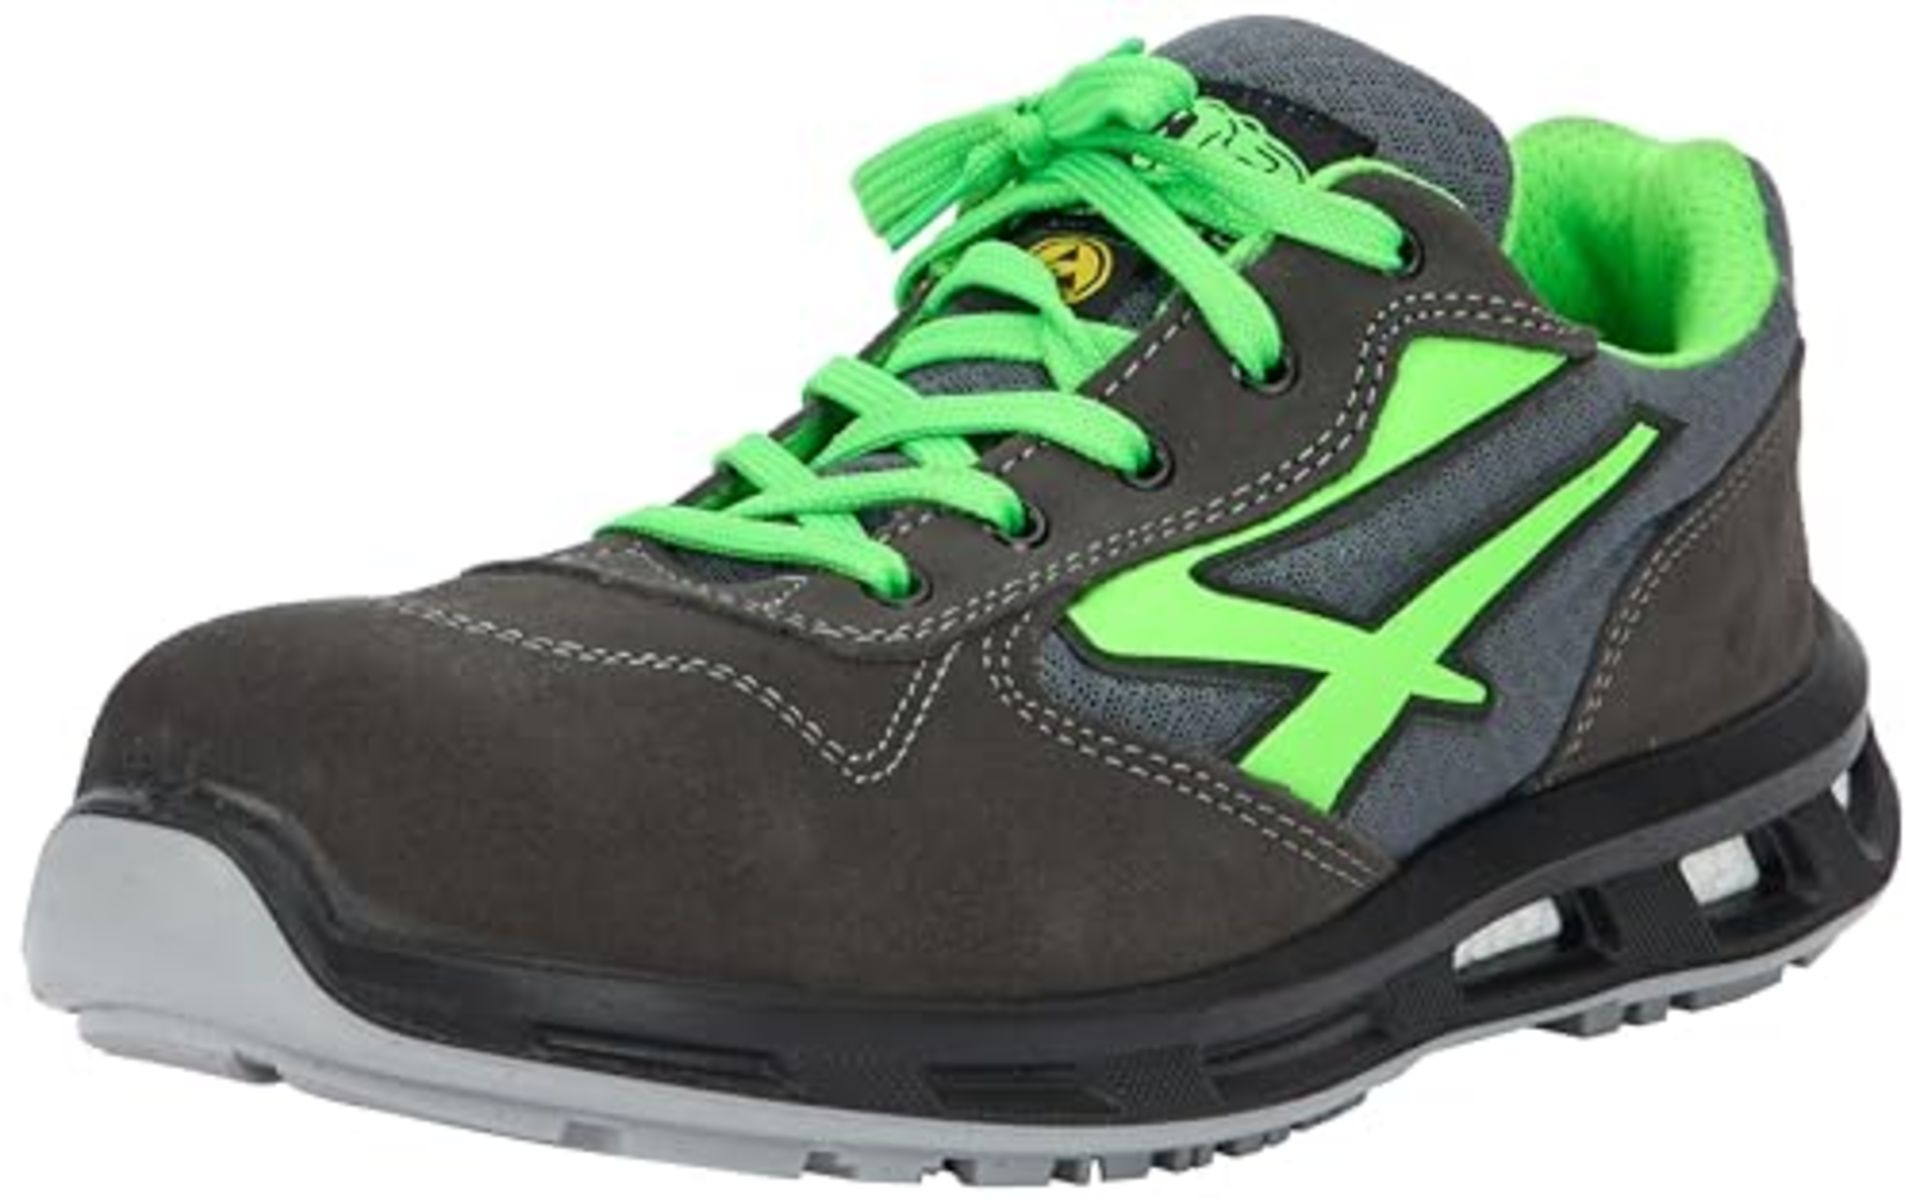 RRP £80.00 U-Power Red Lion Point, unisex safety shoes, lightweight, flexible, made of anti-punct